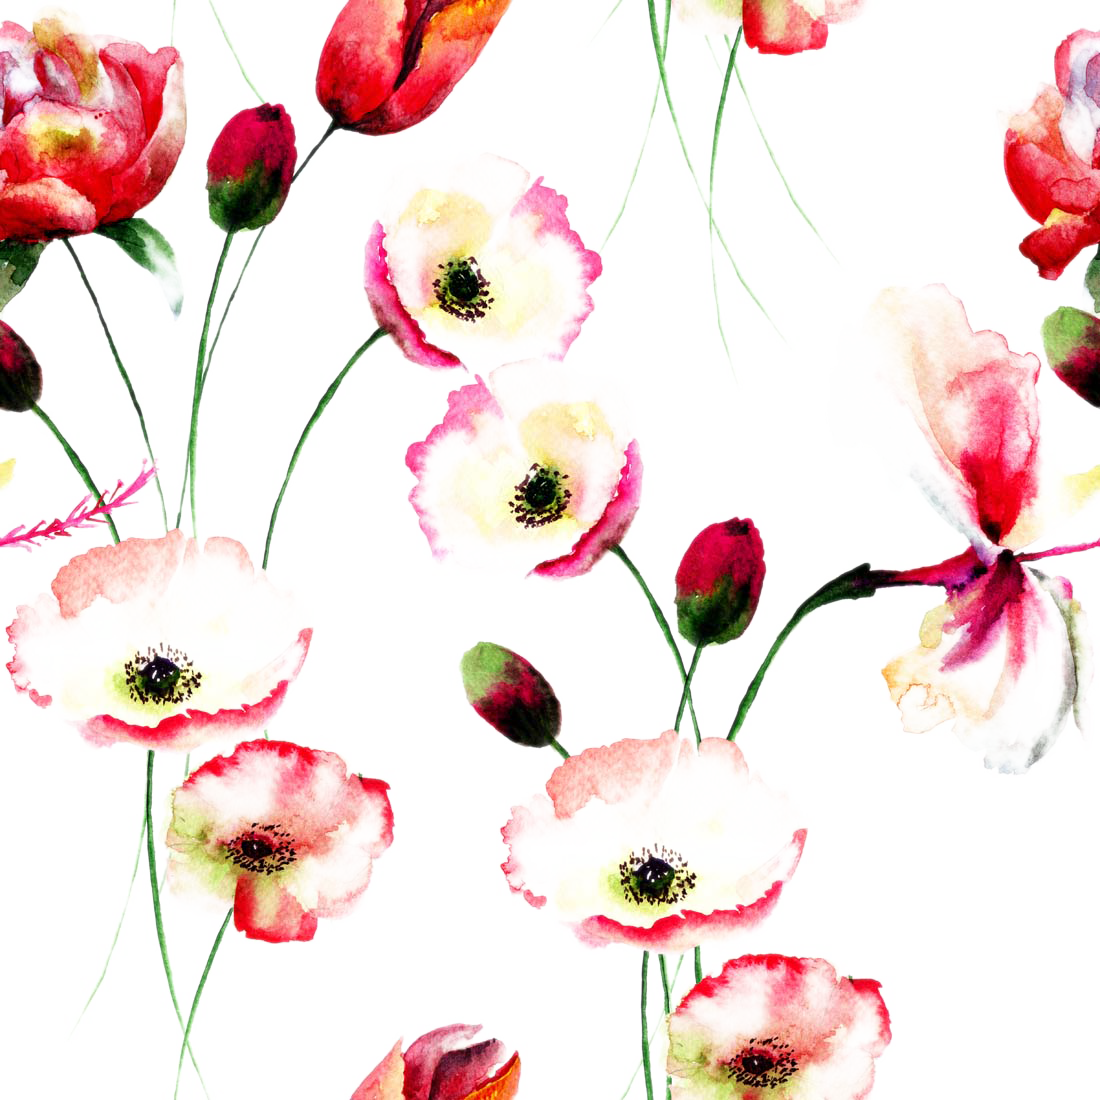 Poppy Flowers Watercolor Painting Floral Design - Positive Simple Reminder Quotes (1100x1100)